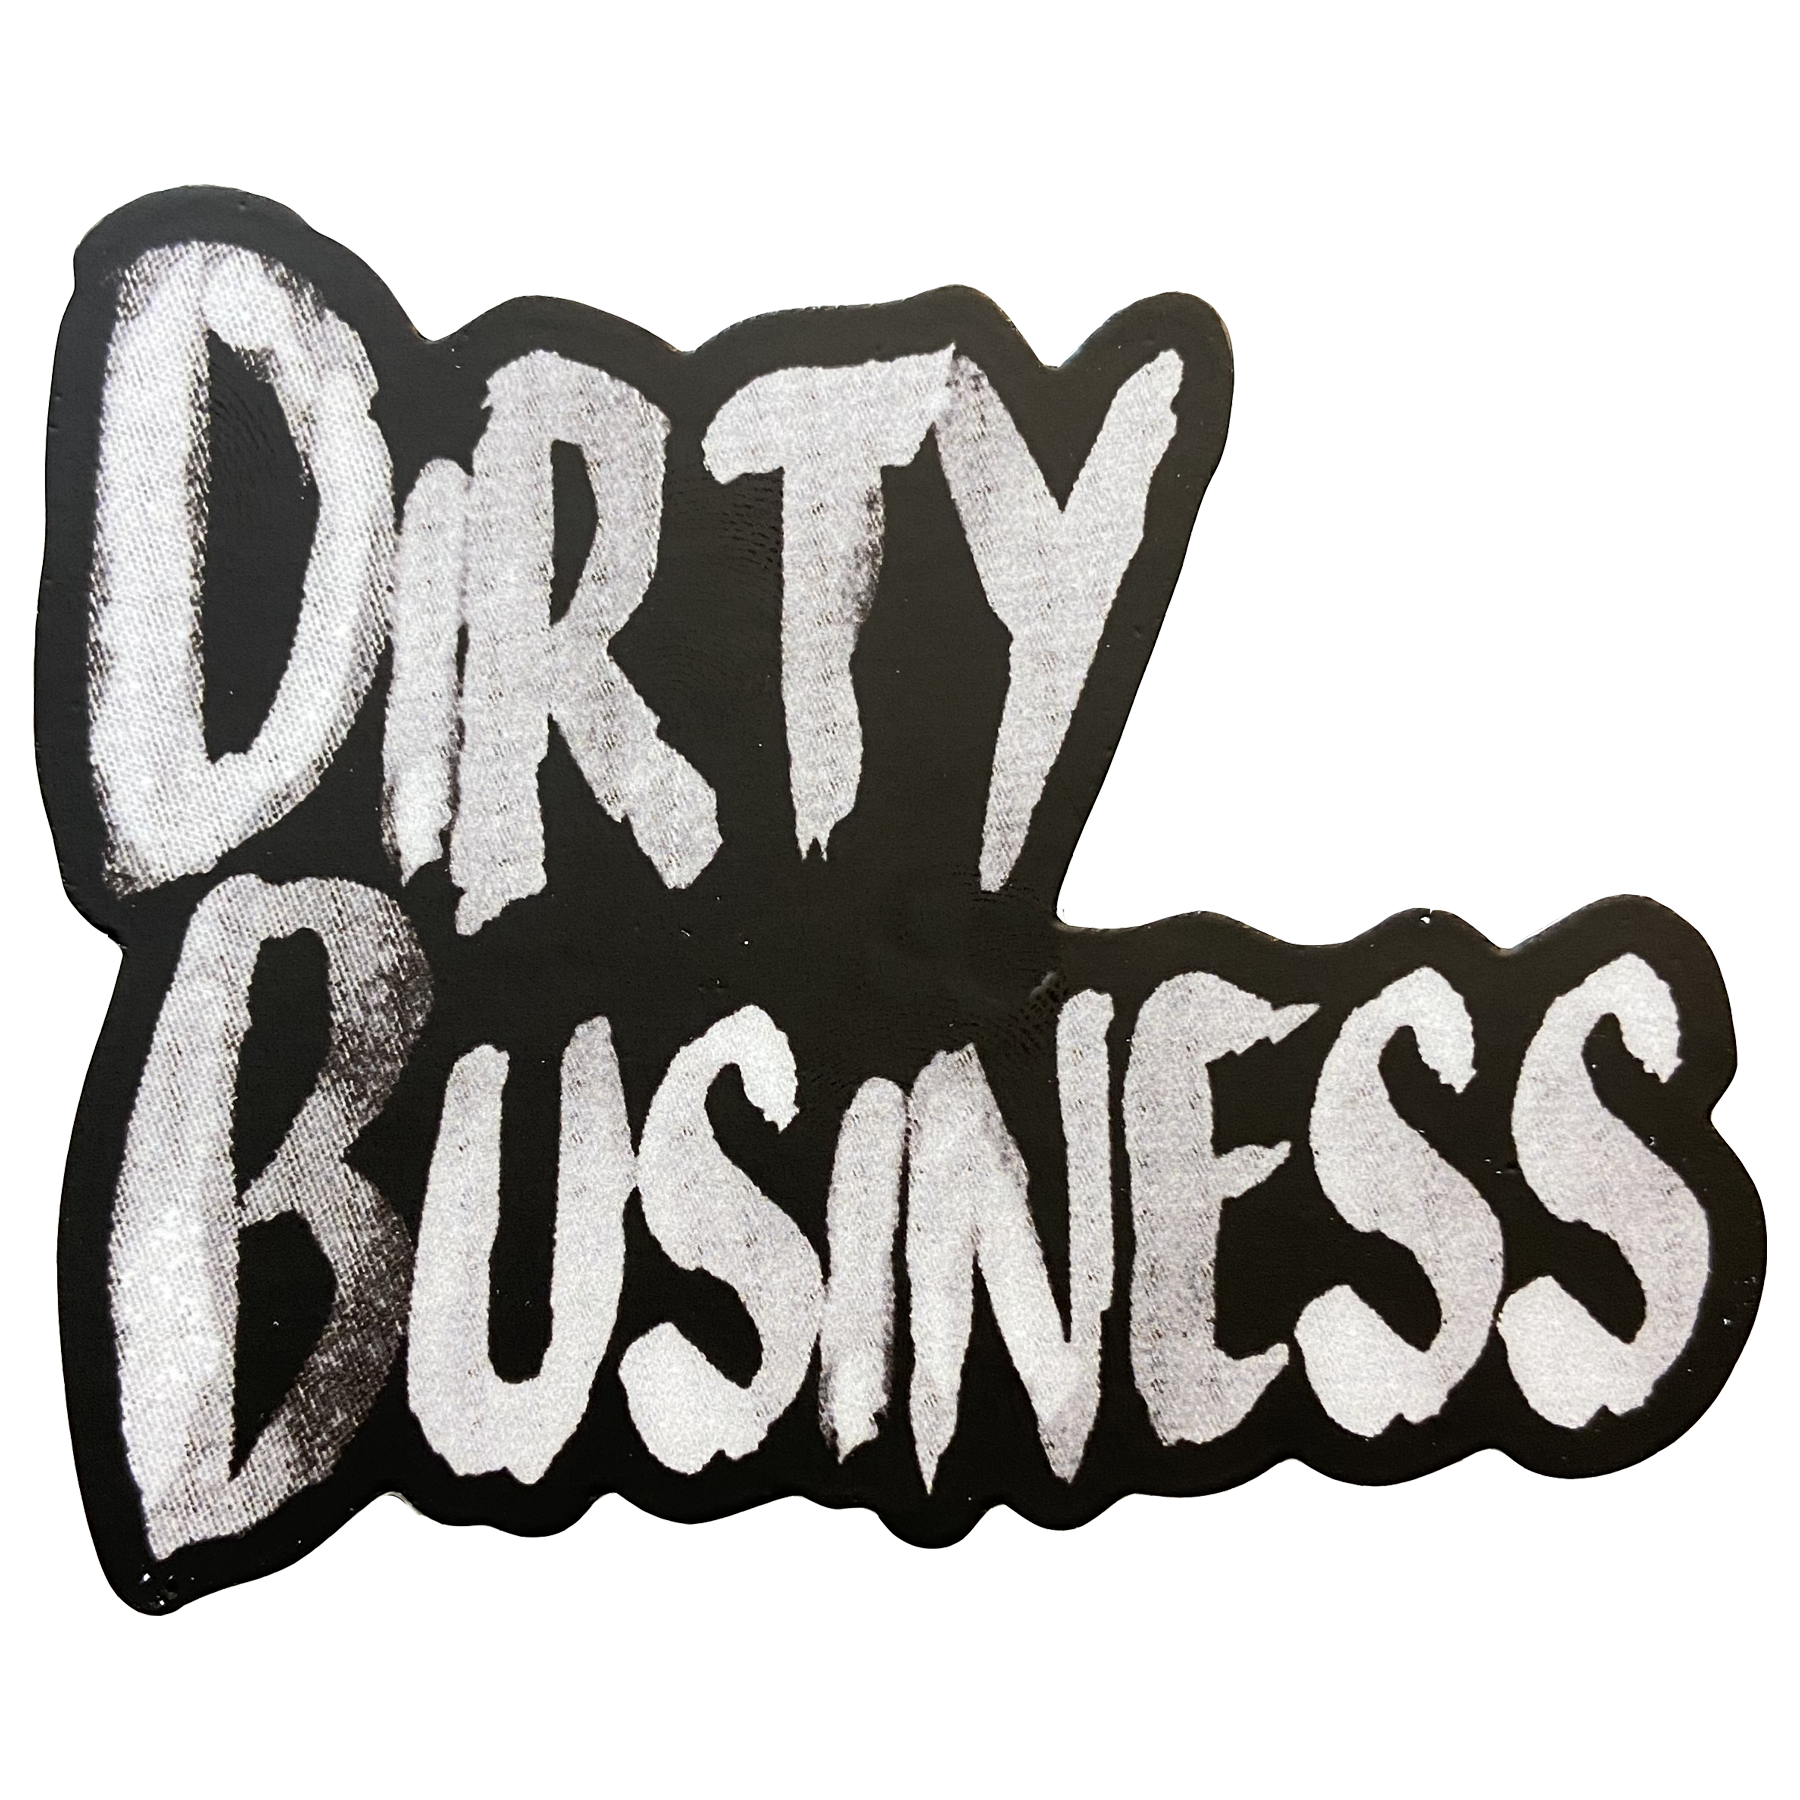 Dirty Business Sticker (Black) – Dirty Business Co